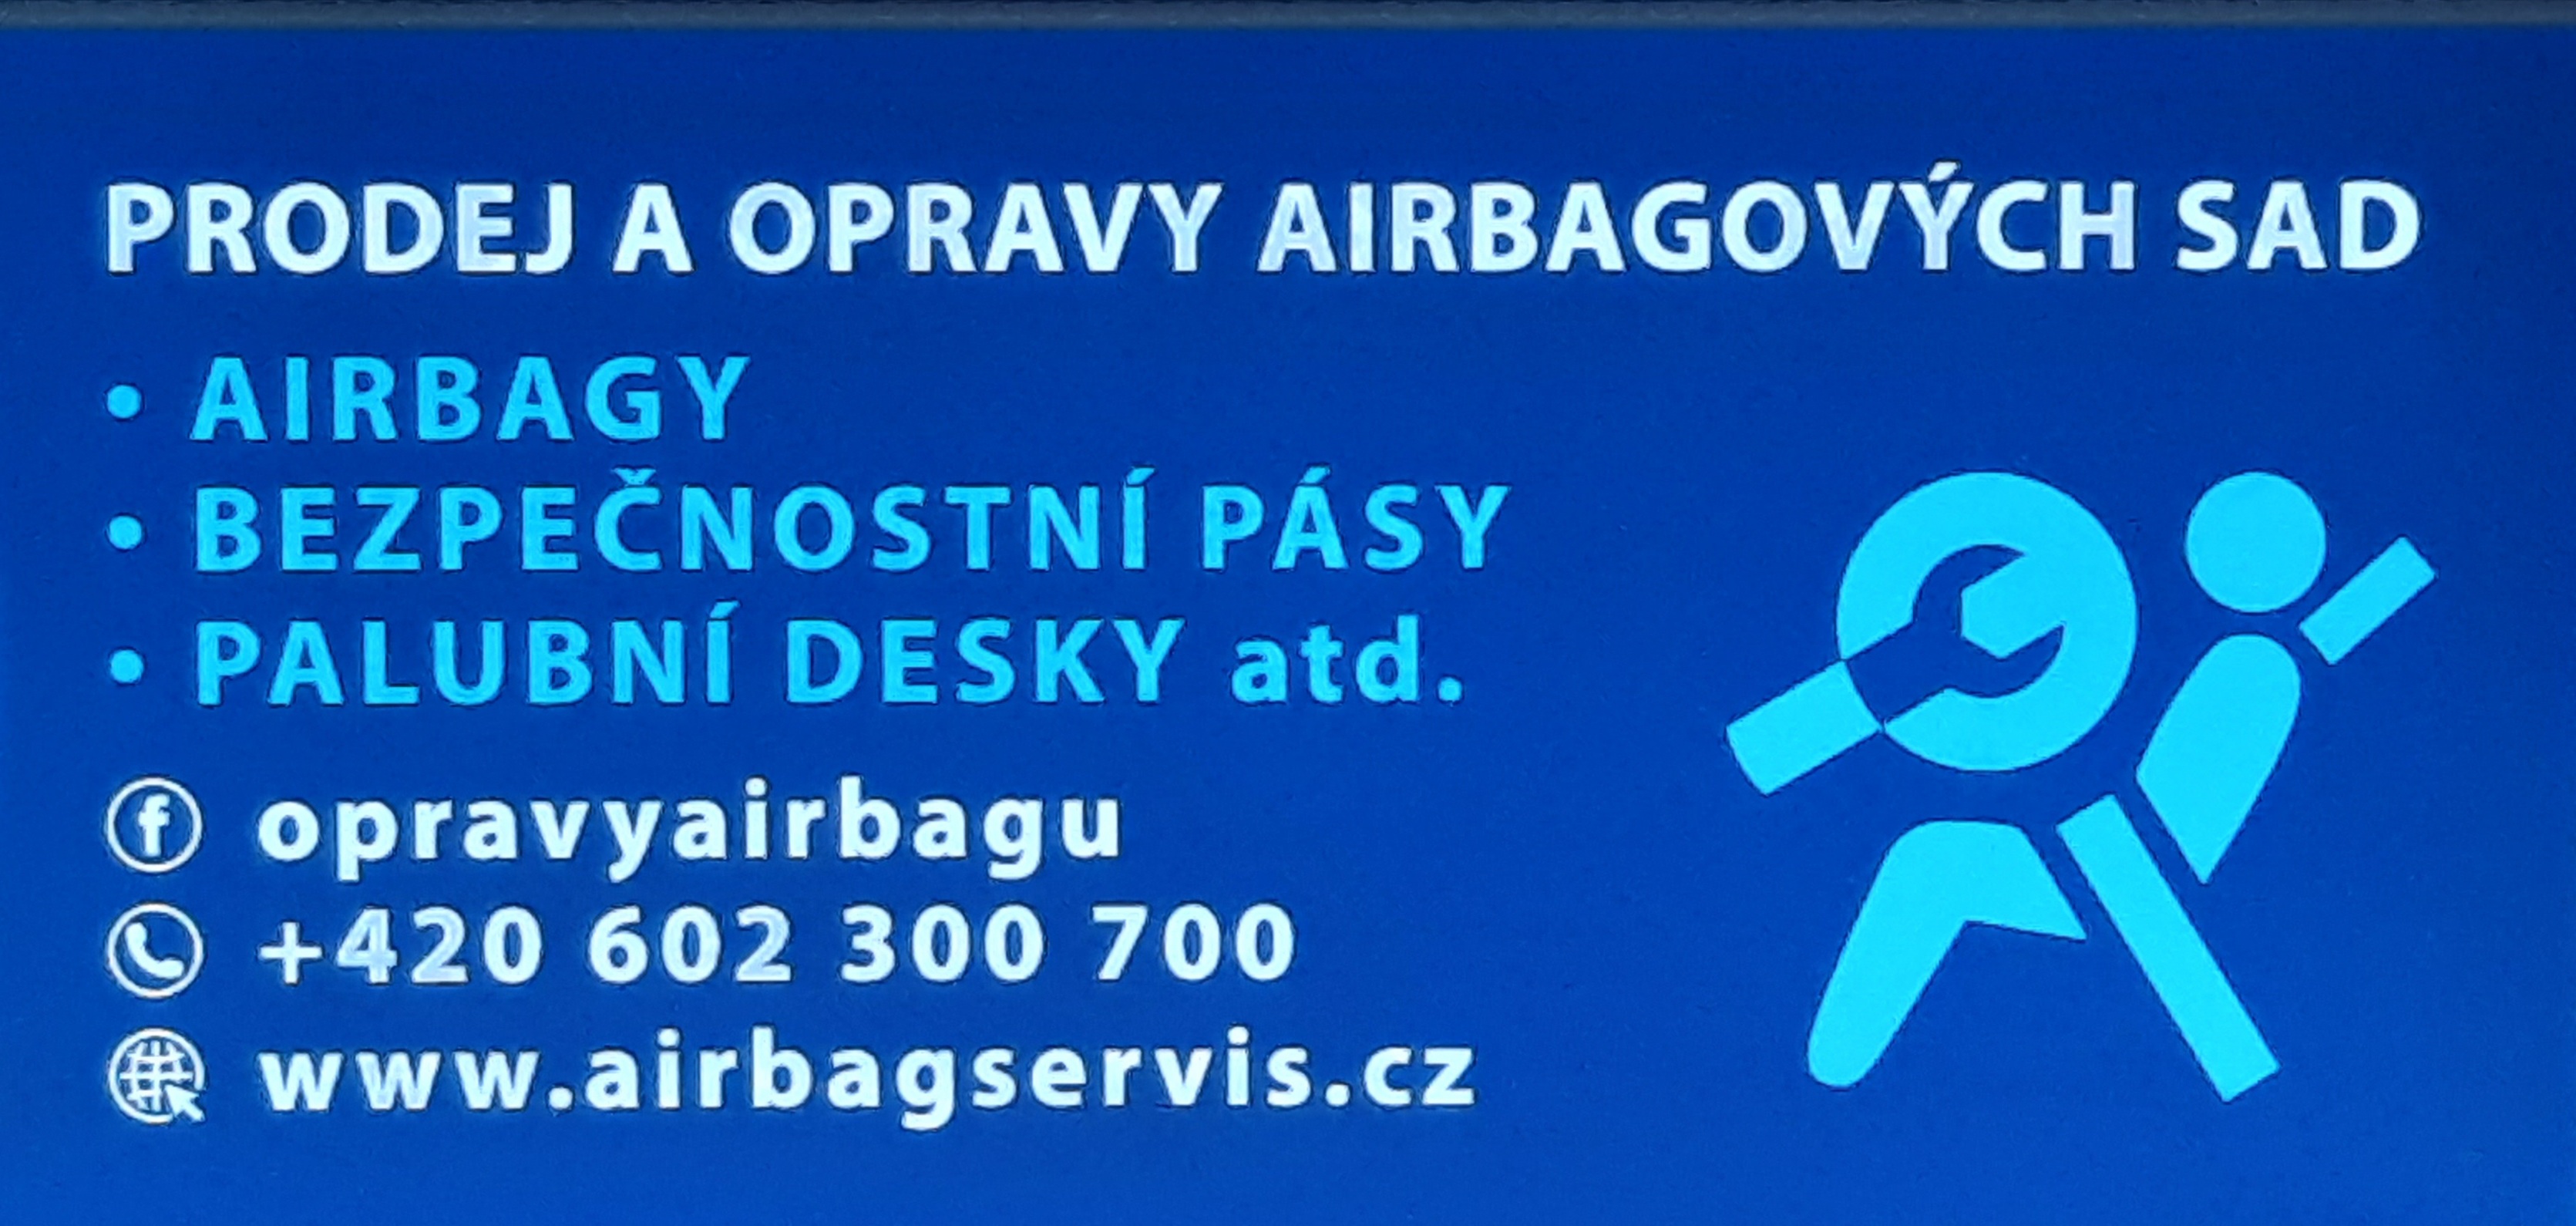 Airbagservis s.r.o.